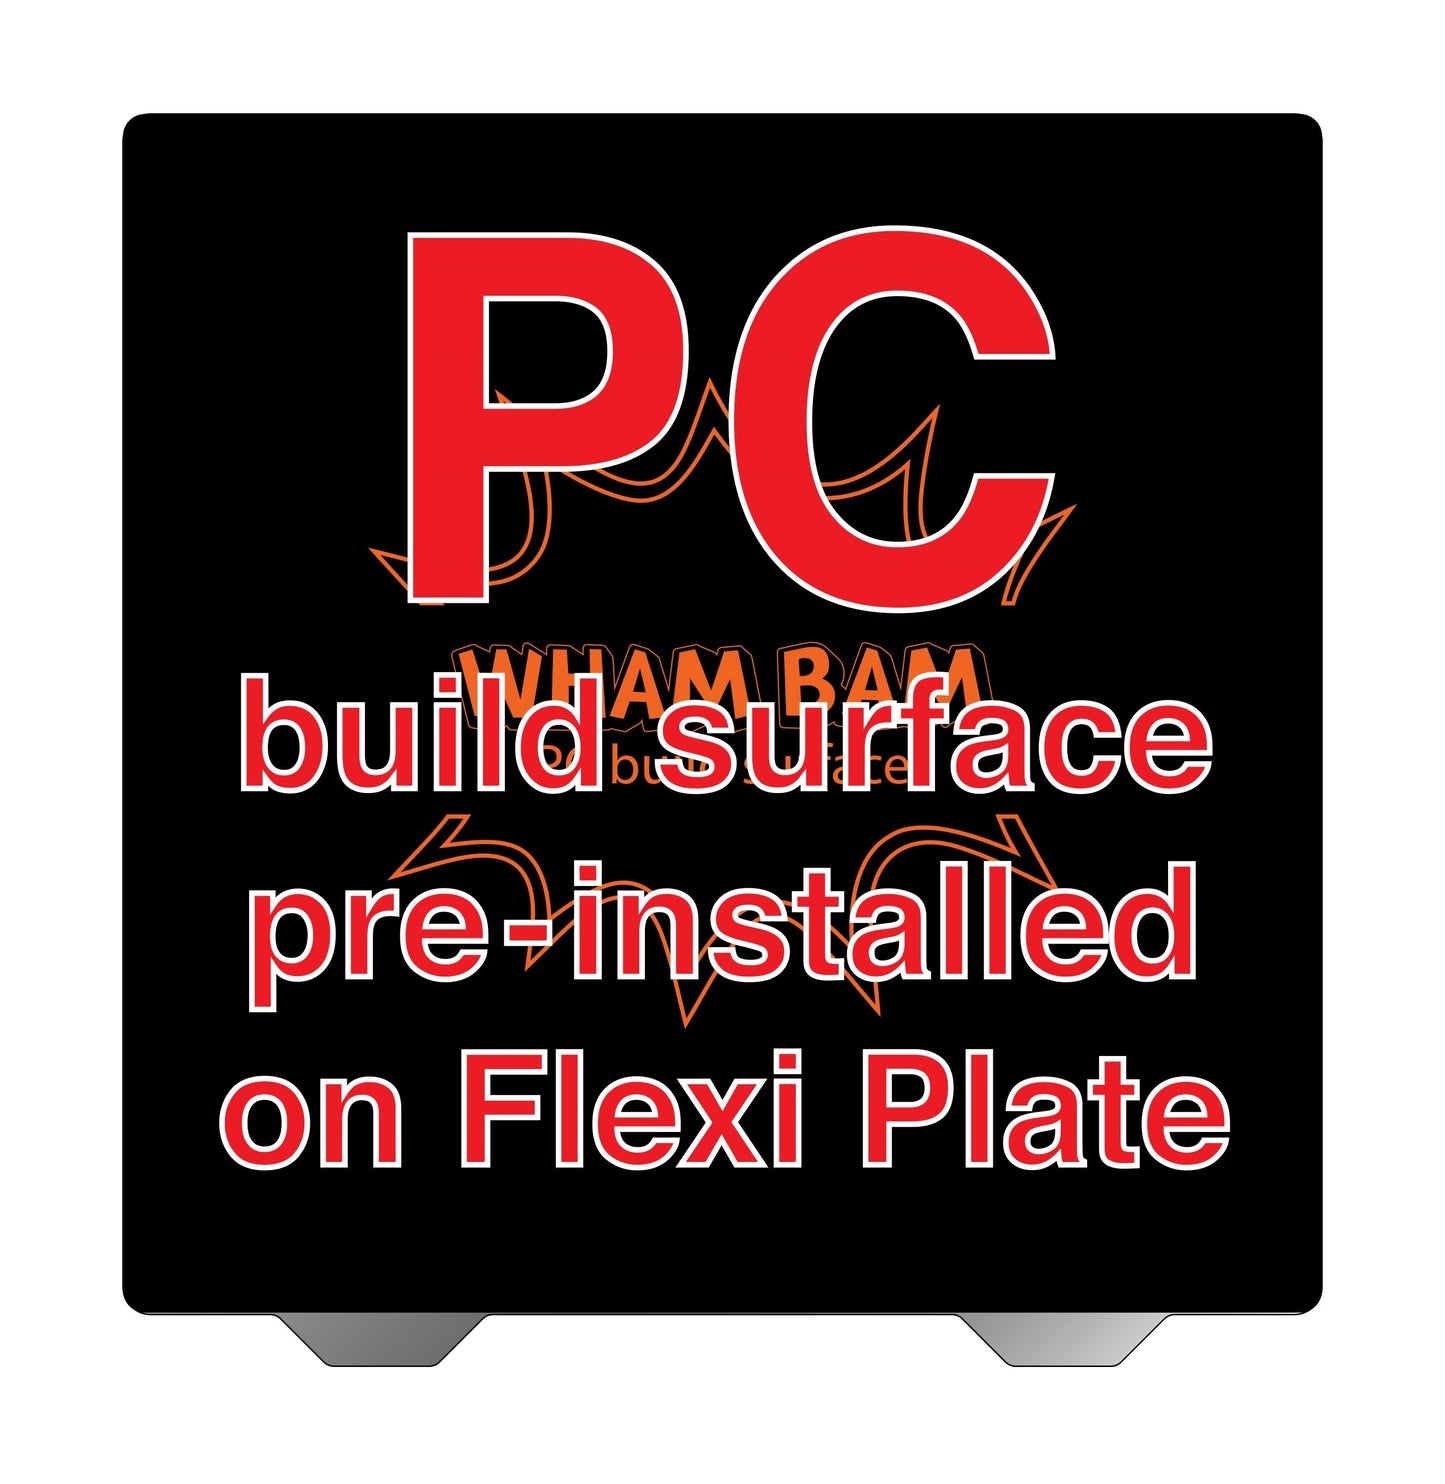 Flexi Plate with Pre-Installed PC Build Surface (Classic Black) - 330 x 330 - Geeetech A30, TronXY X3S  X5S